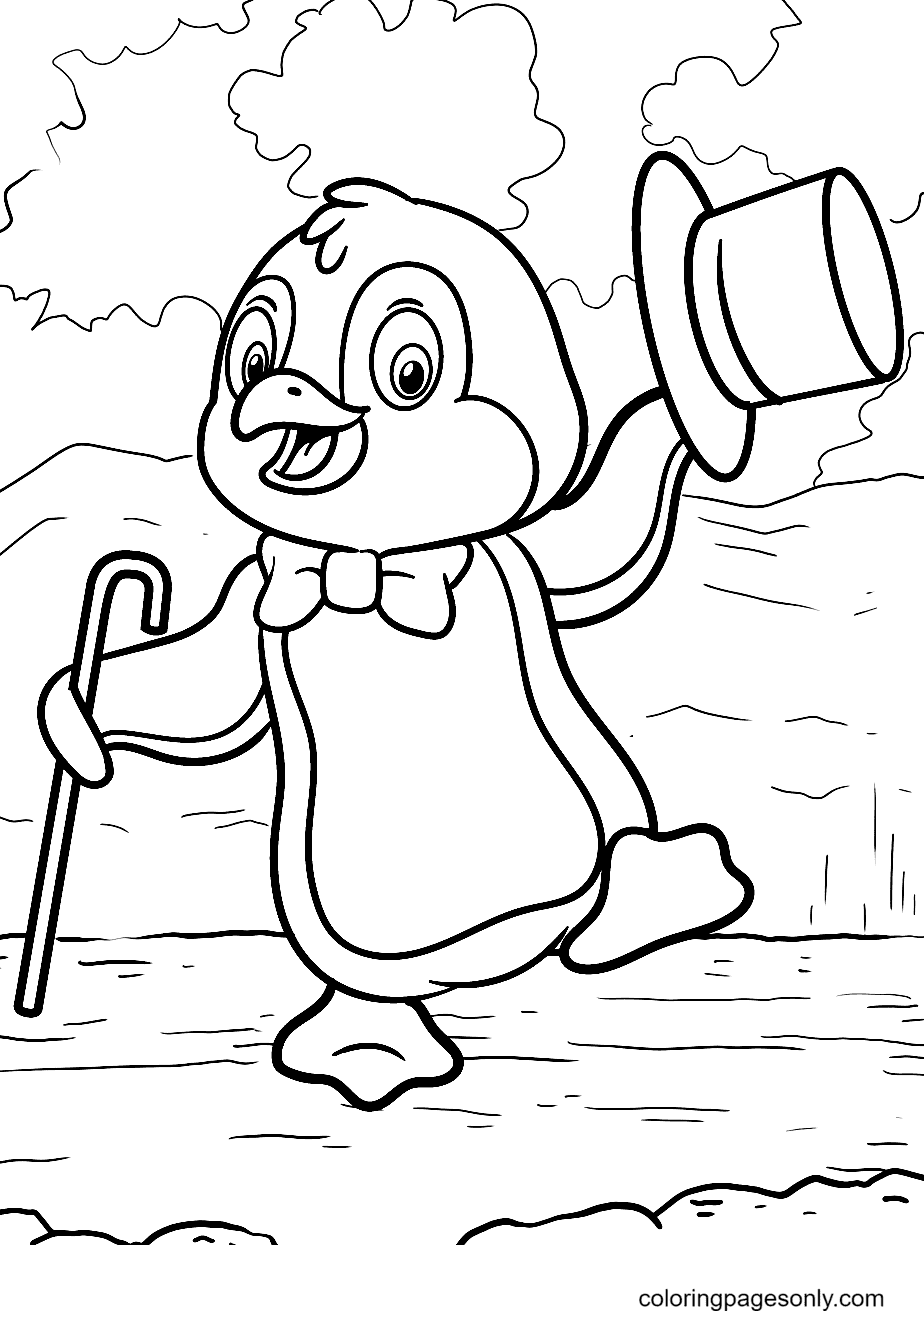 A Cute Dancing Penguin Coloring Pages